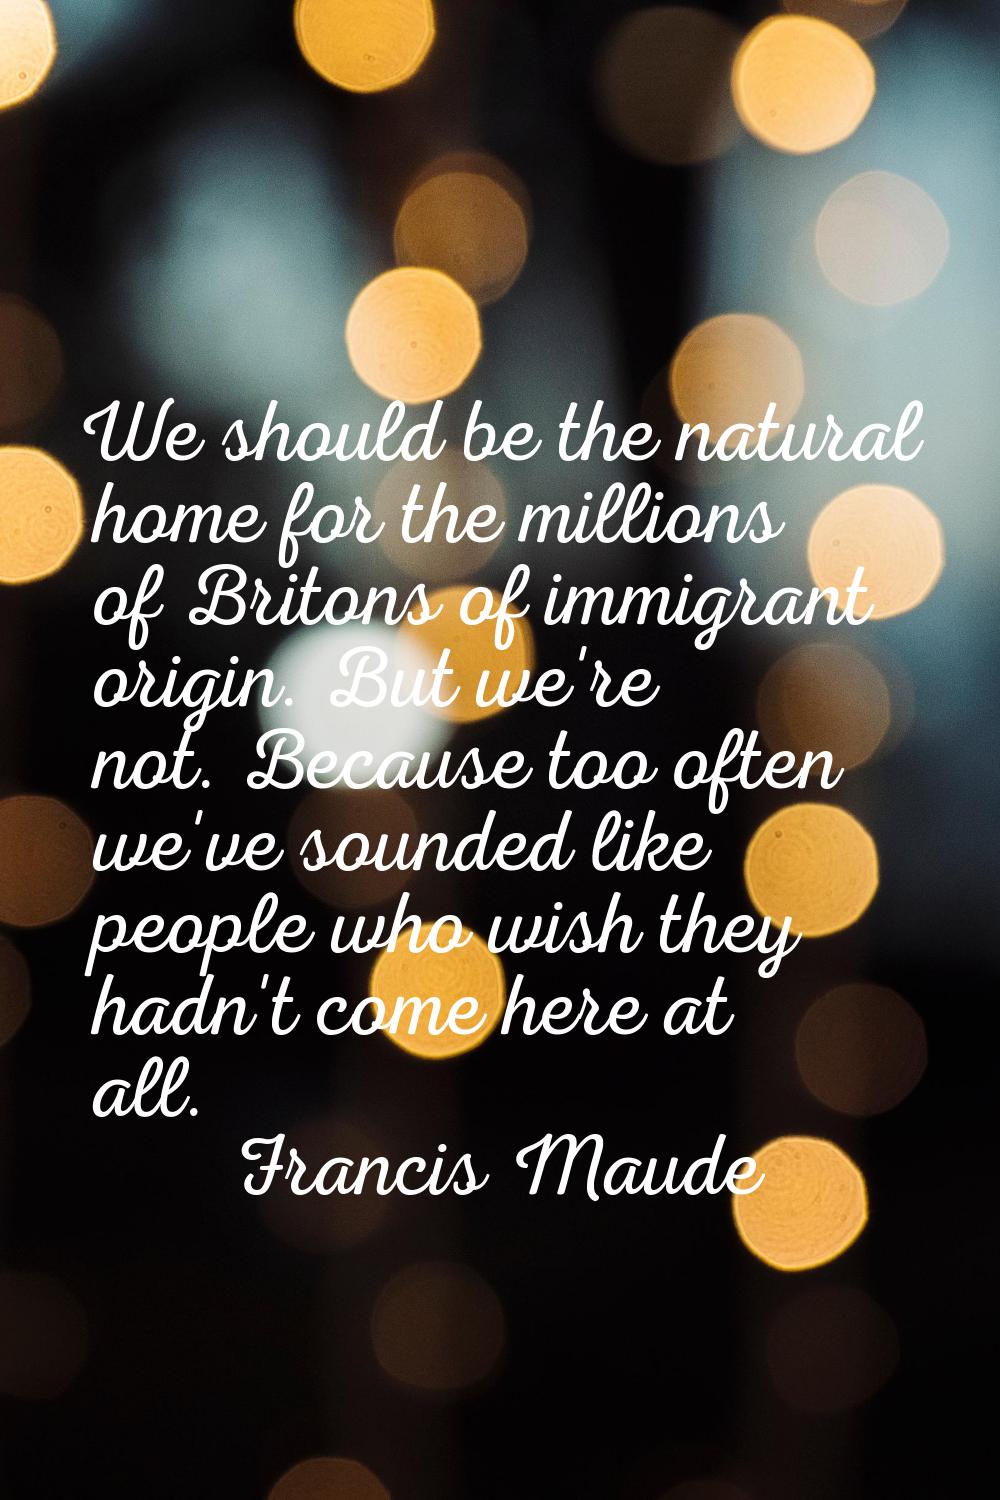 We should be the natural home for the millions of Britons of immigrant origin. But we're not. Becau